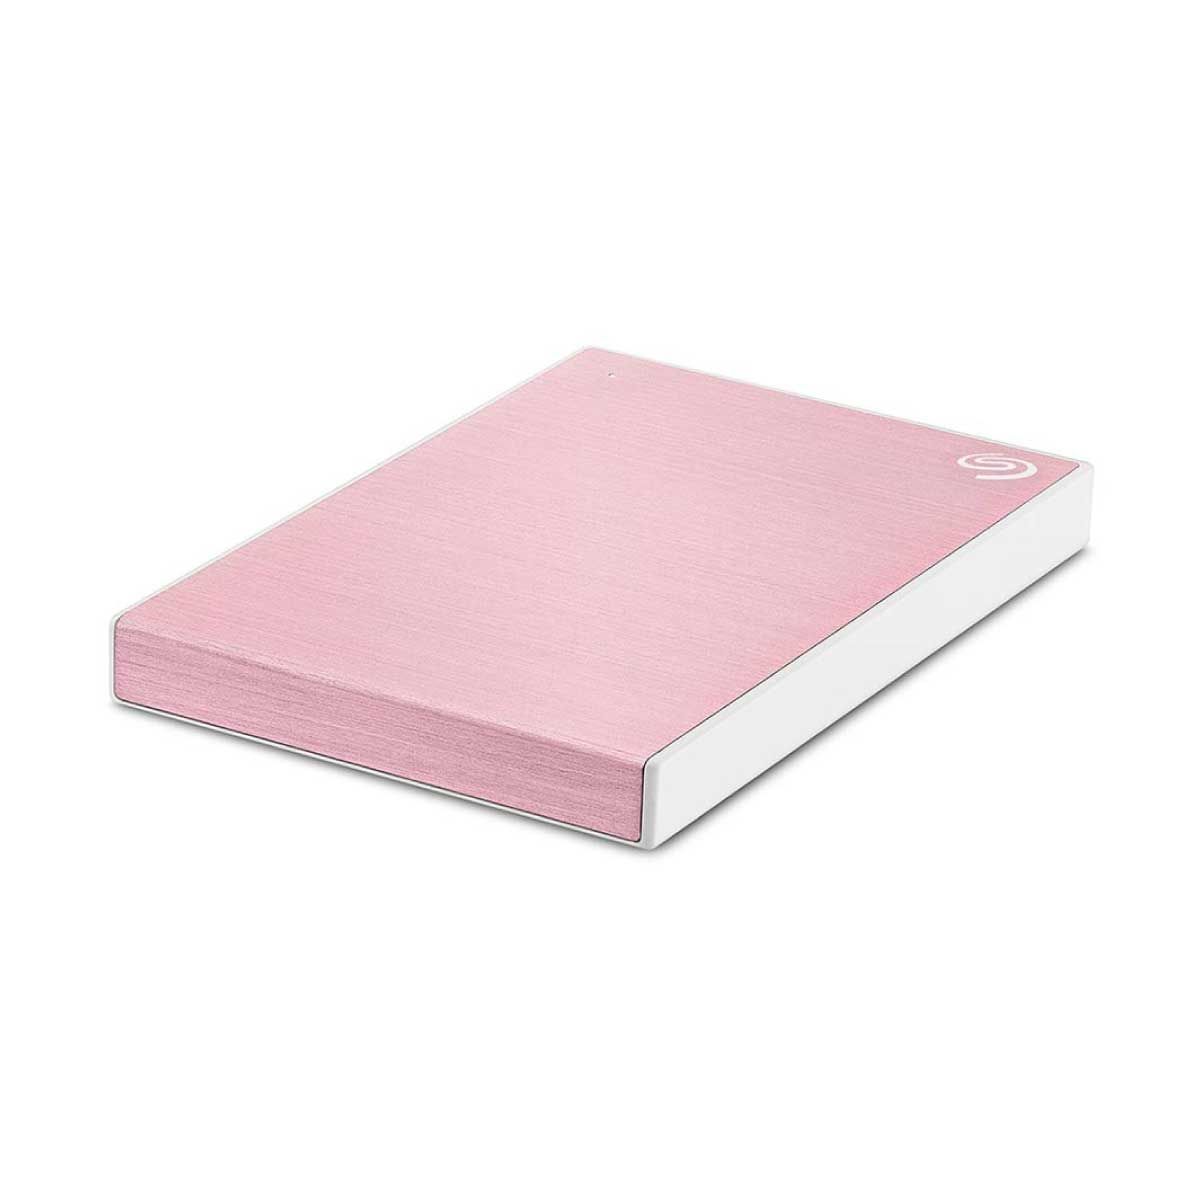 2 TB PORTABLE HDD (ฮาร์ดดิสก์พกพา) SEAGATE ONE TOUCH WITH PASSWORD (ROSE GOLD) (STKY2000405)